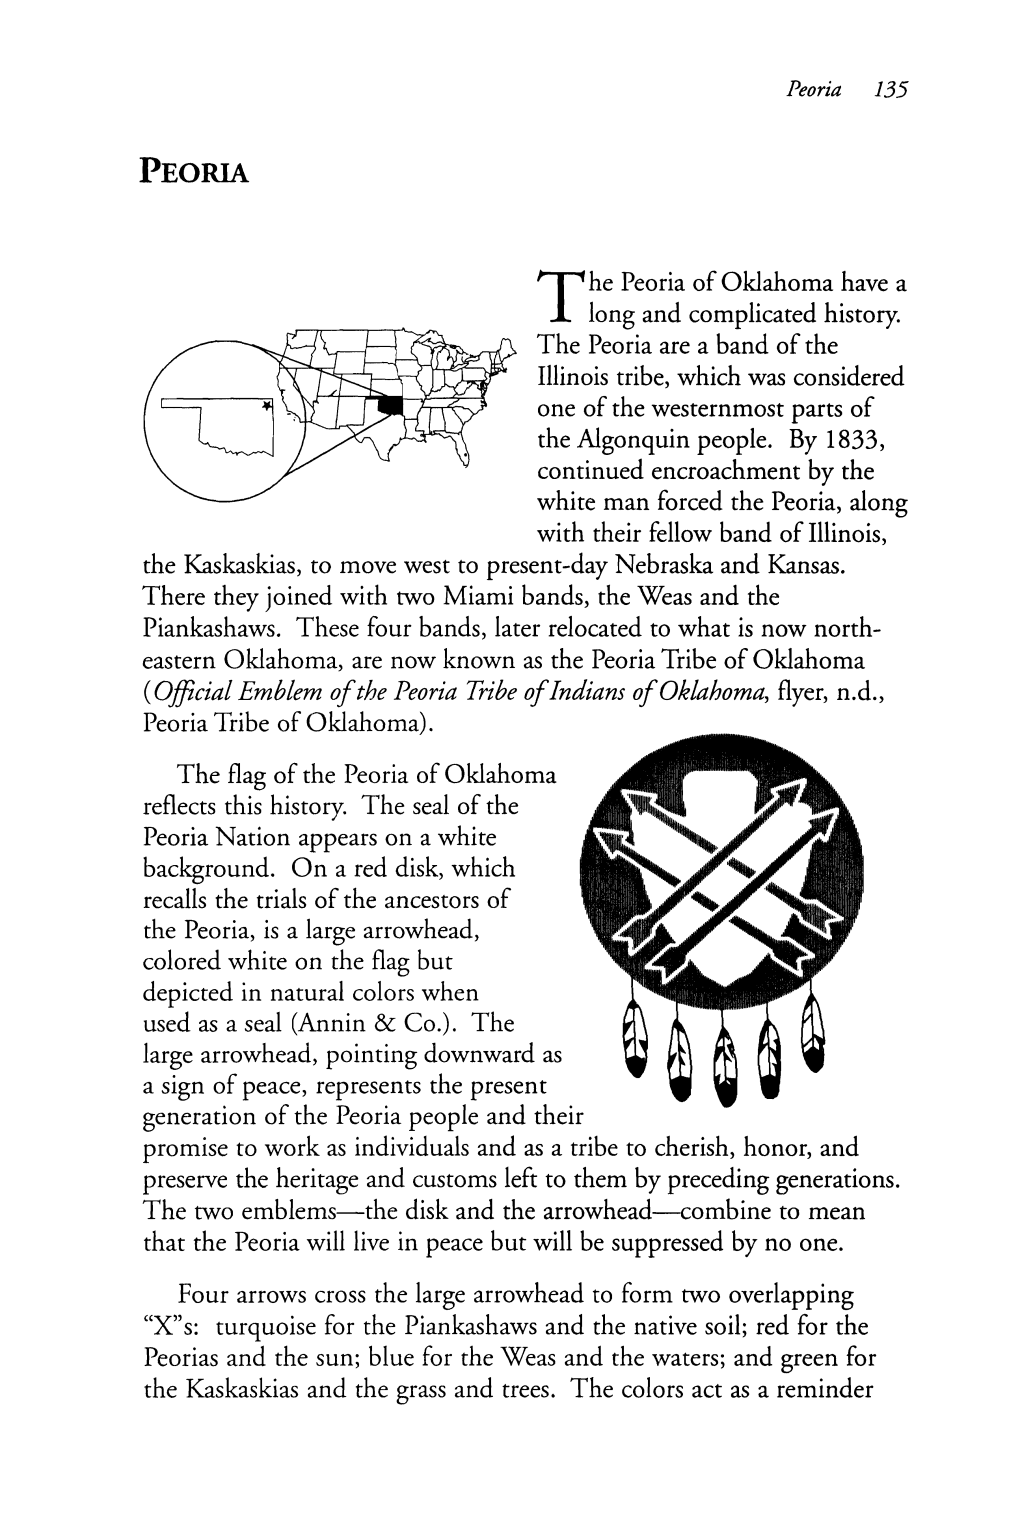 ^ I ^He Peoria of Oklahoma Have a X Long and Complicated History. The